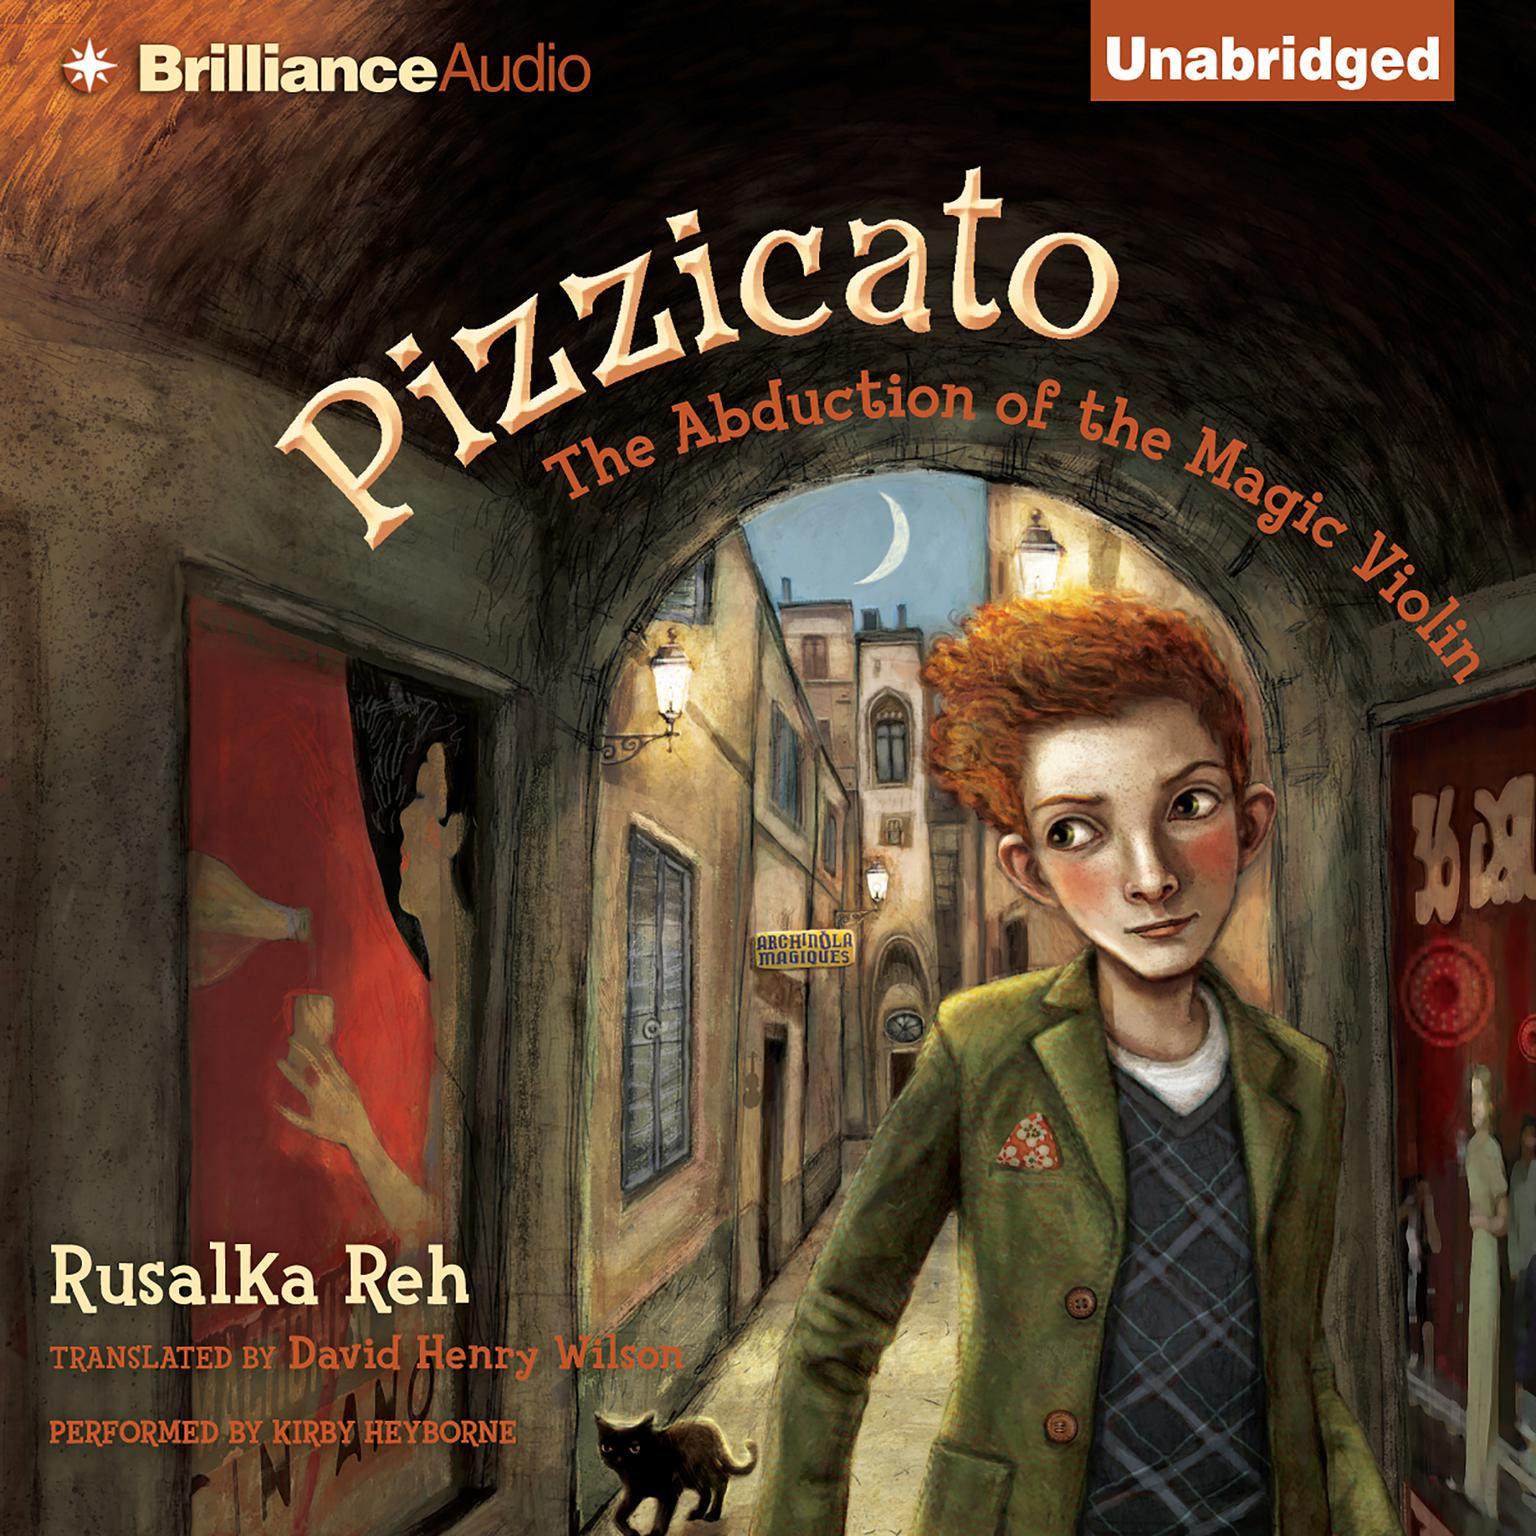 Pizzicato: The Abduction of the Magic Violin Audiobook, by Rusalka Reh